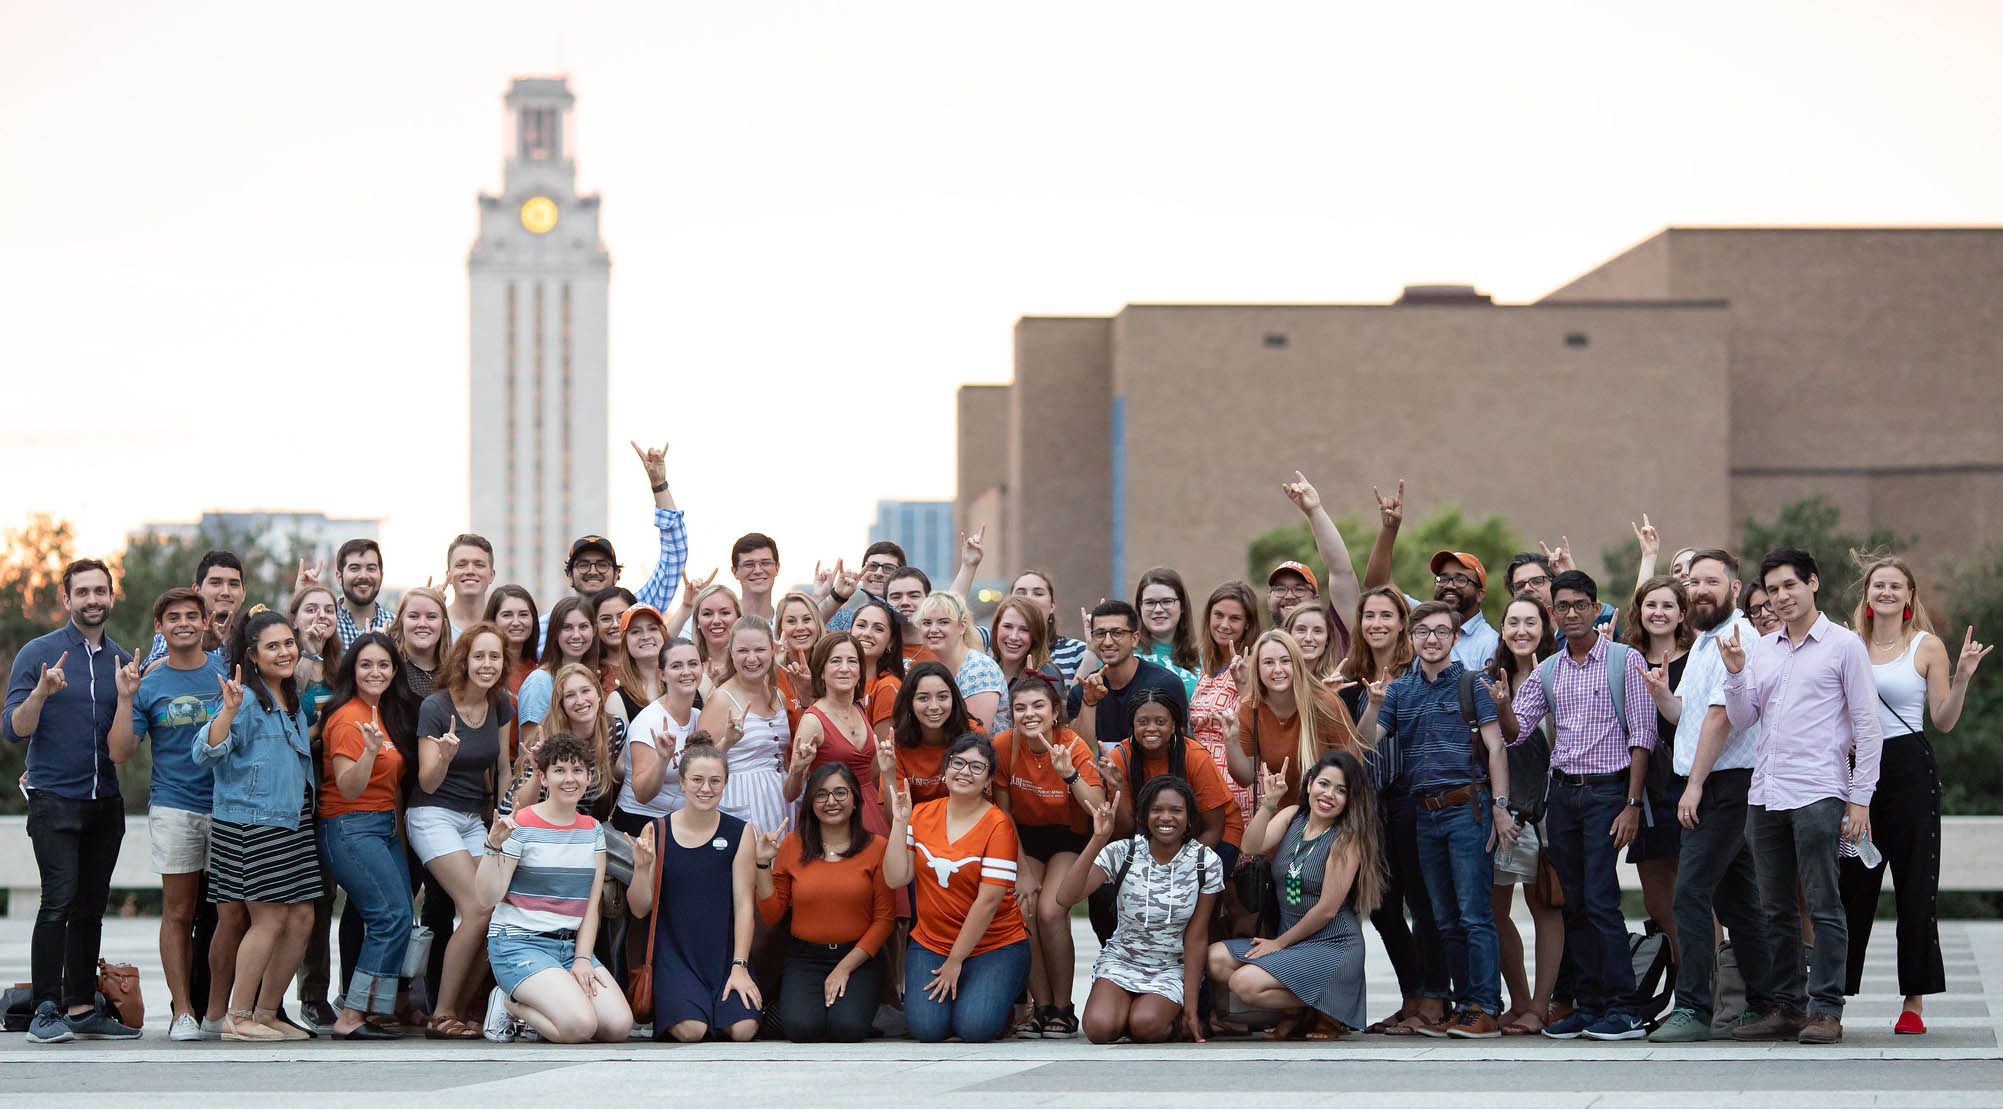 The incoming LBJ School class celebrates the 2019 Gone to Texas